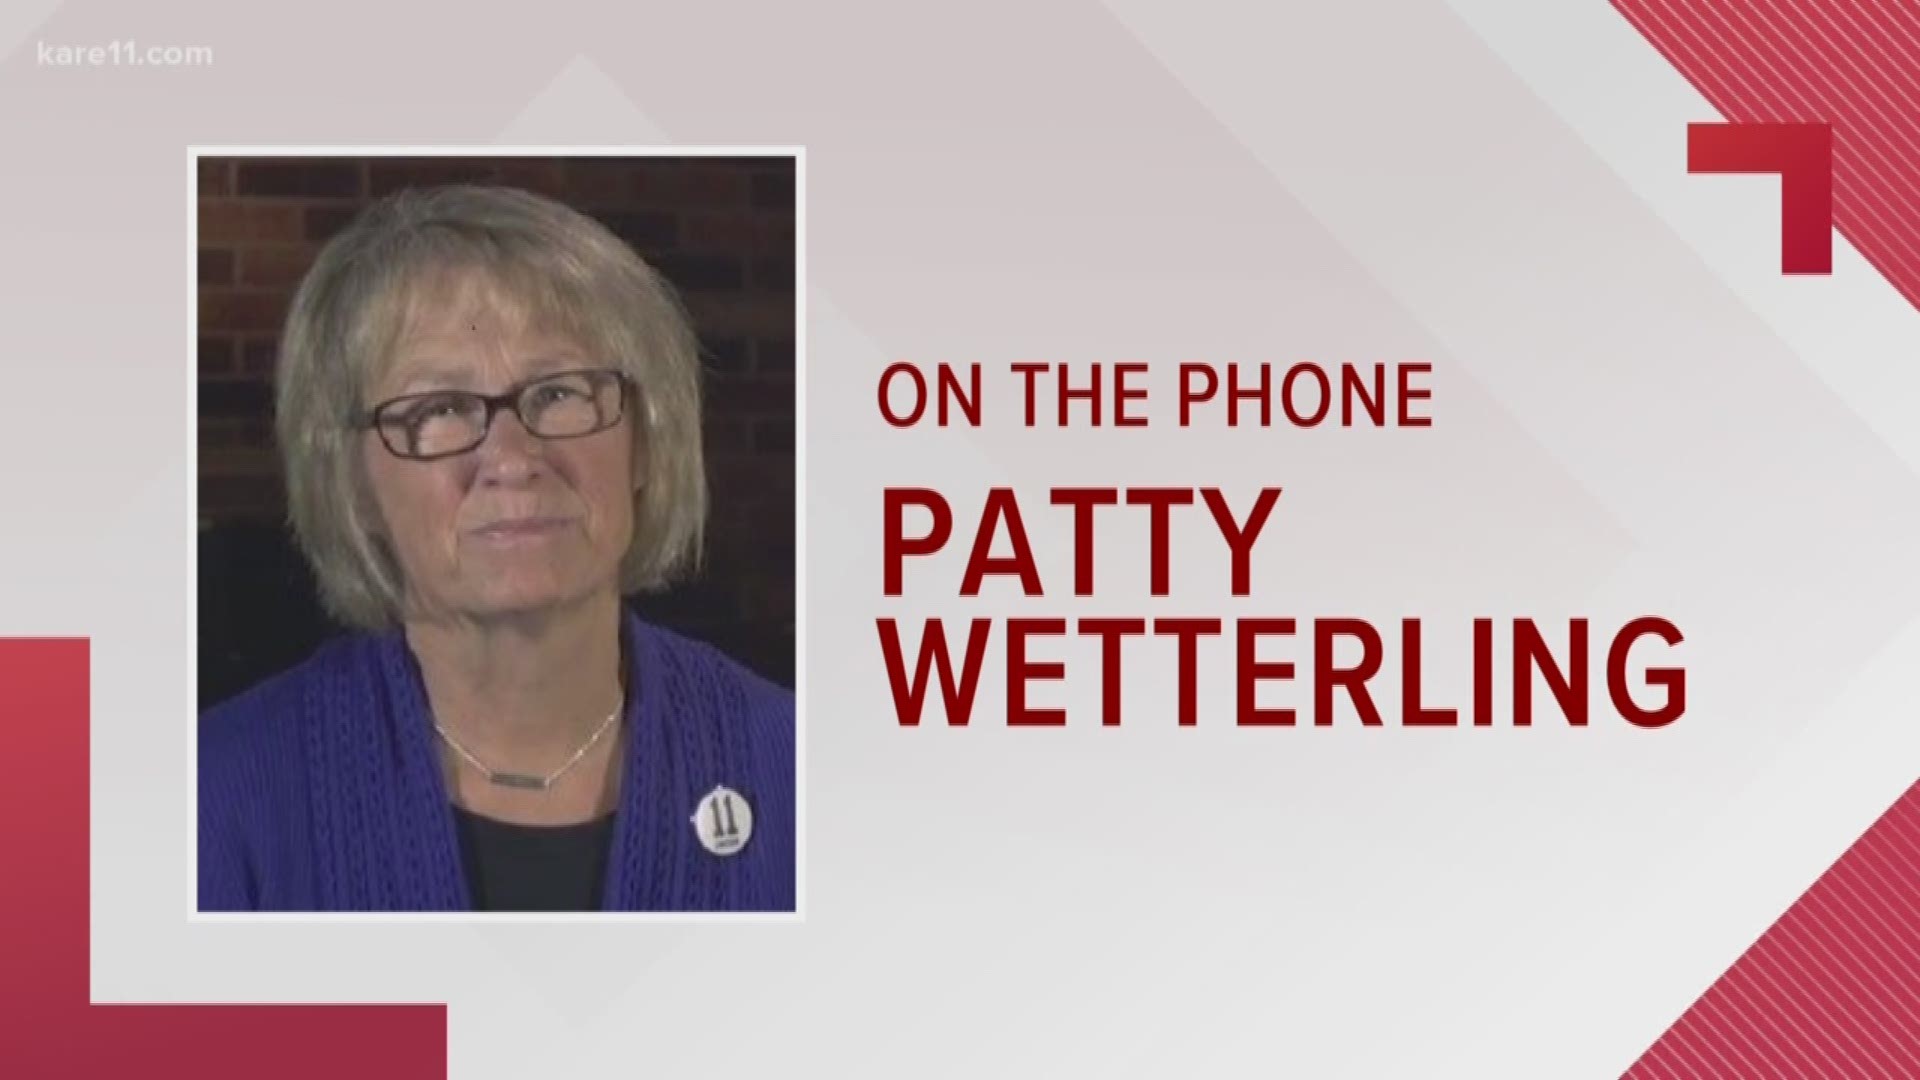 In a phone conversation, Patty Wetterling weighed in on the closure in the Jayme Closs case.